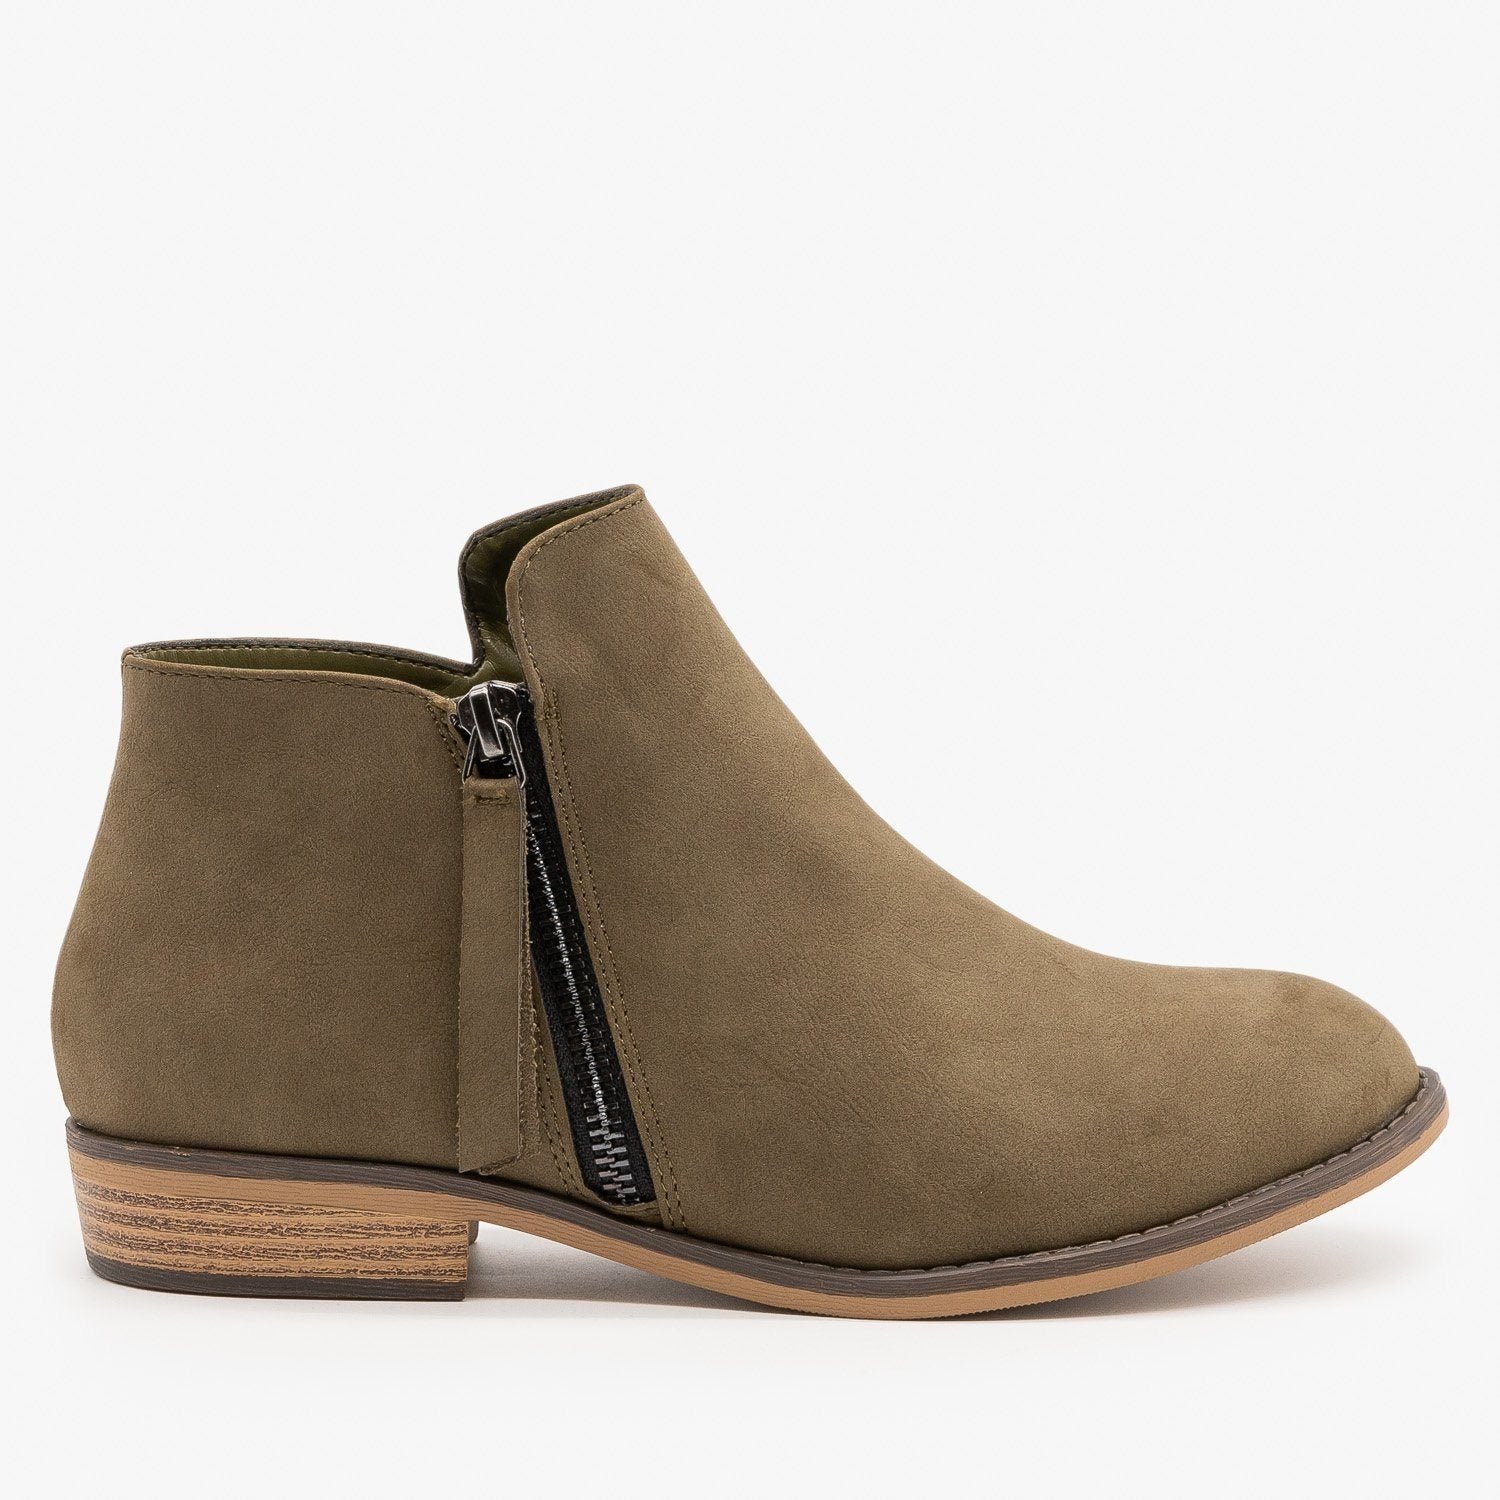 Zip-up Ankle Booties - City Classified 